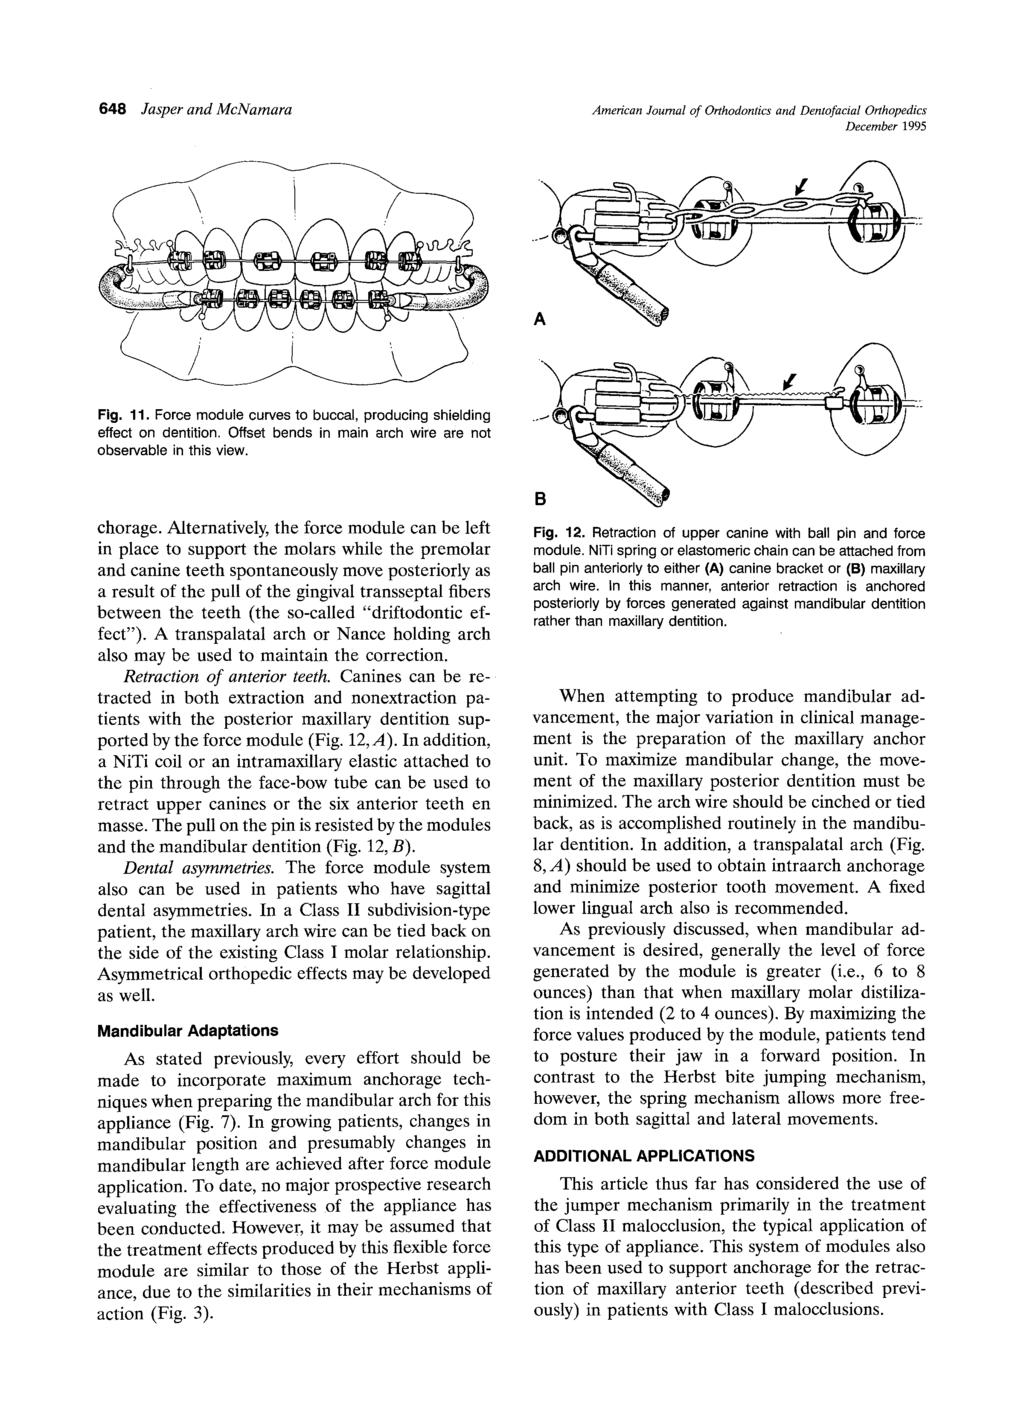 648 Jasper and McNamara American Journal of Orthodontics and Dentofacial Orthopedics December 1995 Fig. 11. Force module curves to buccal, producing shielding effect on dentition.